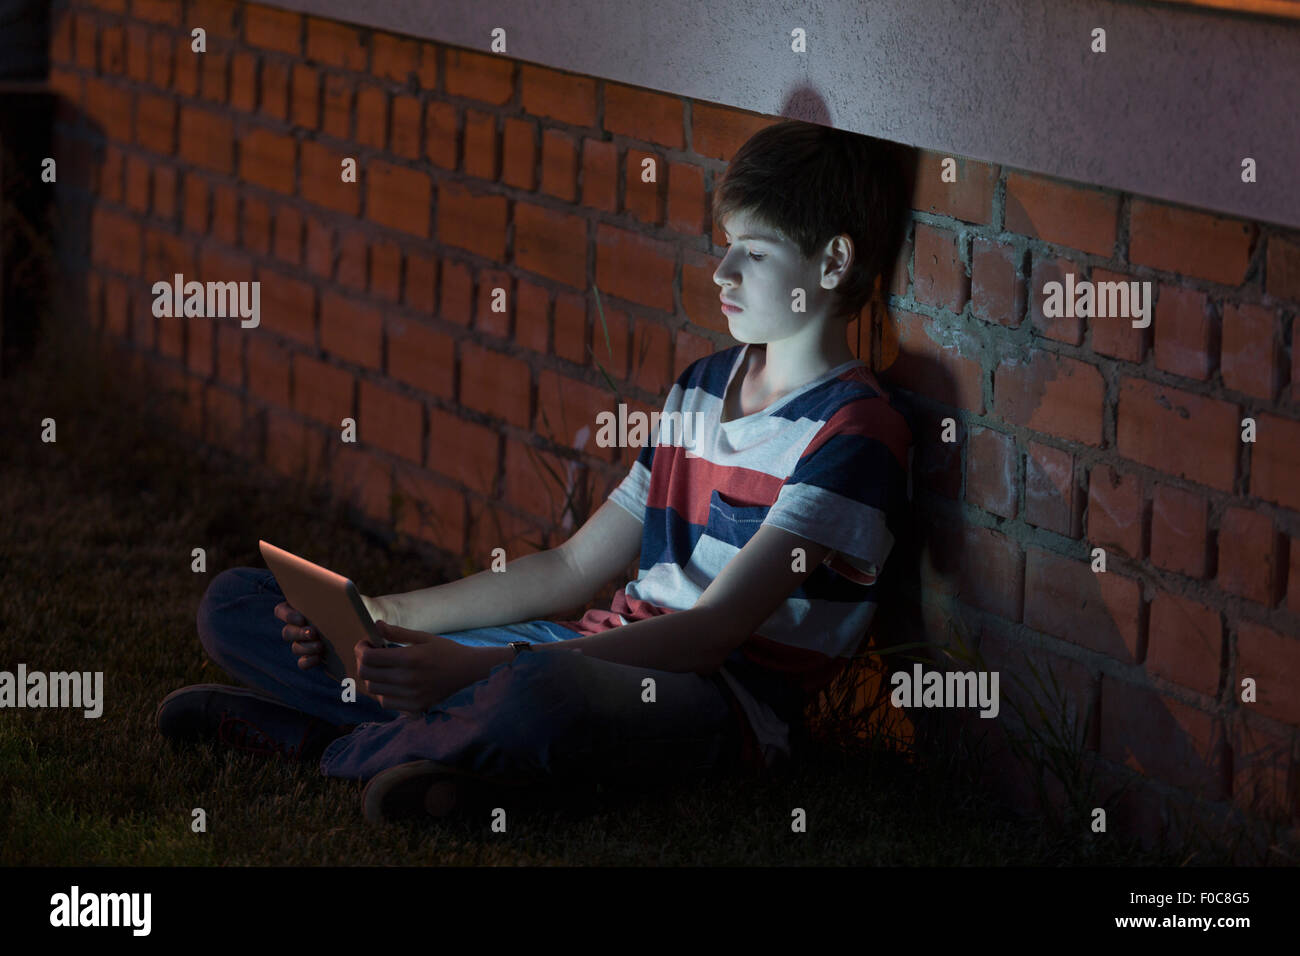 Boy using digital tablet while leaning against brick wall Stock Photo